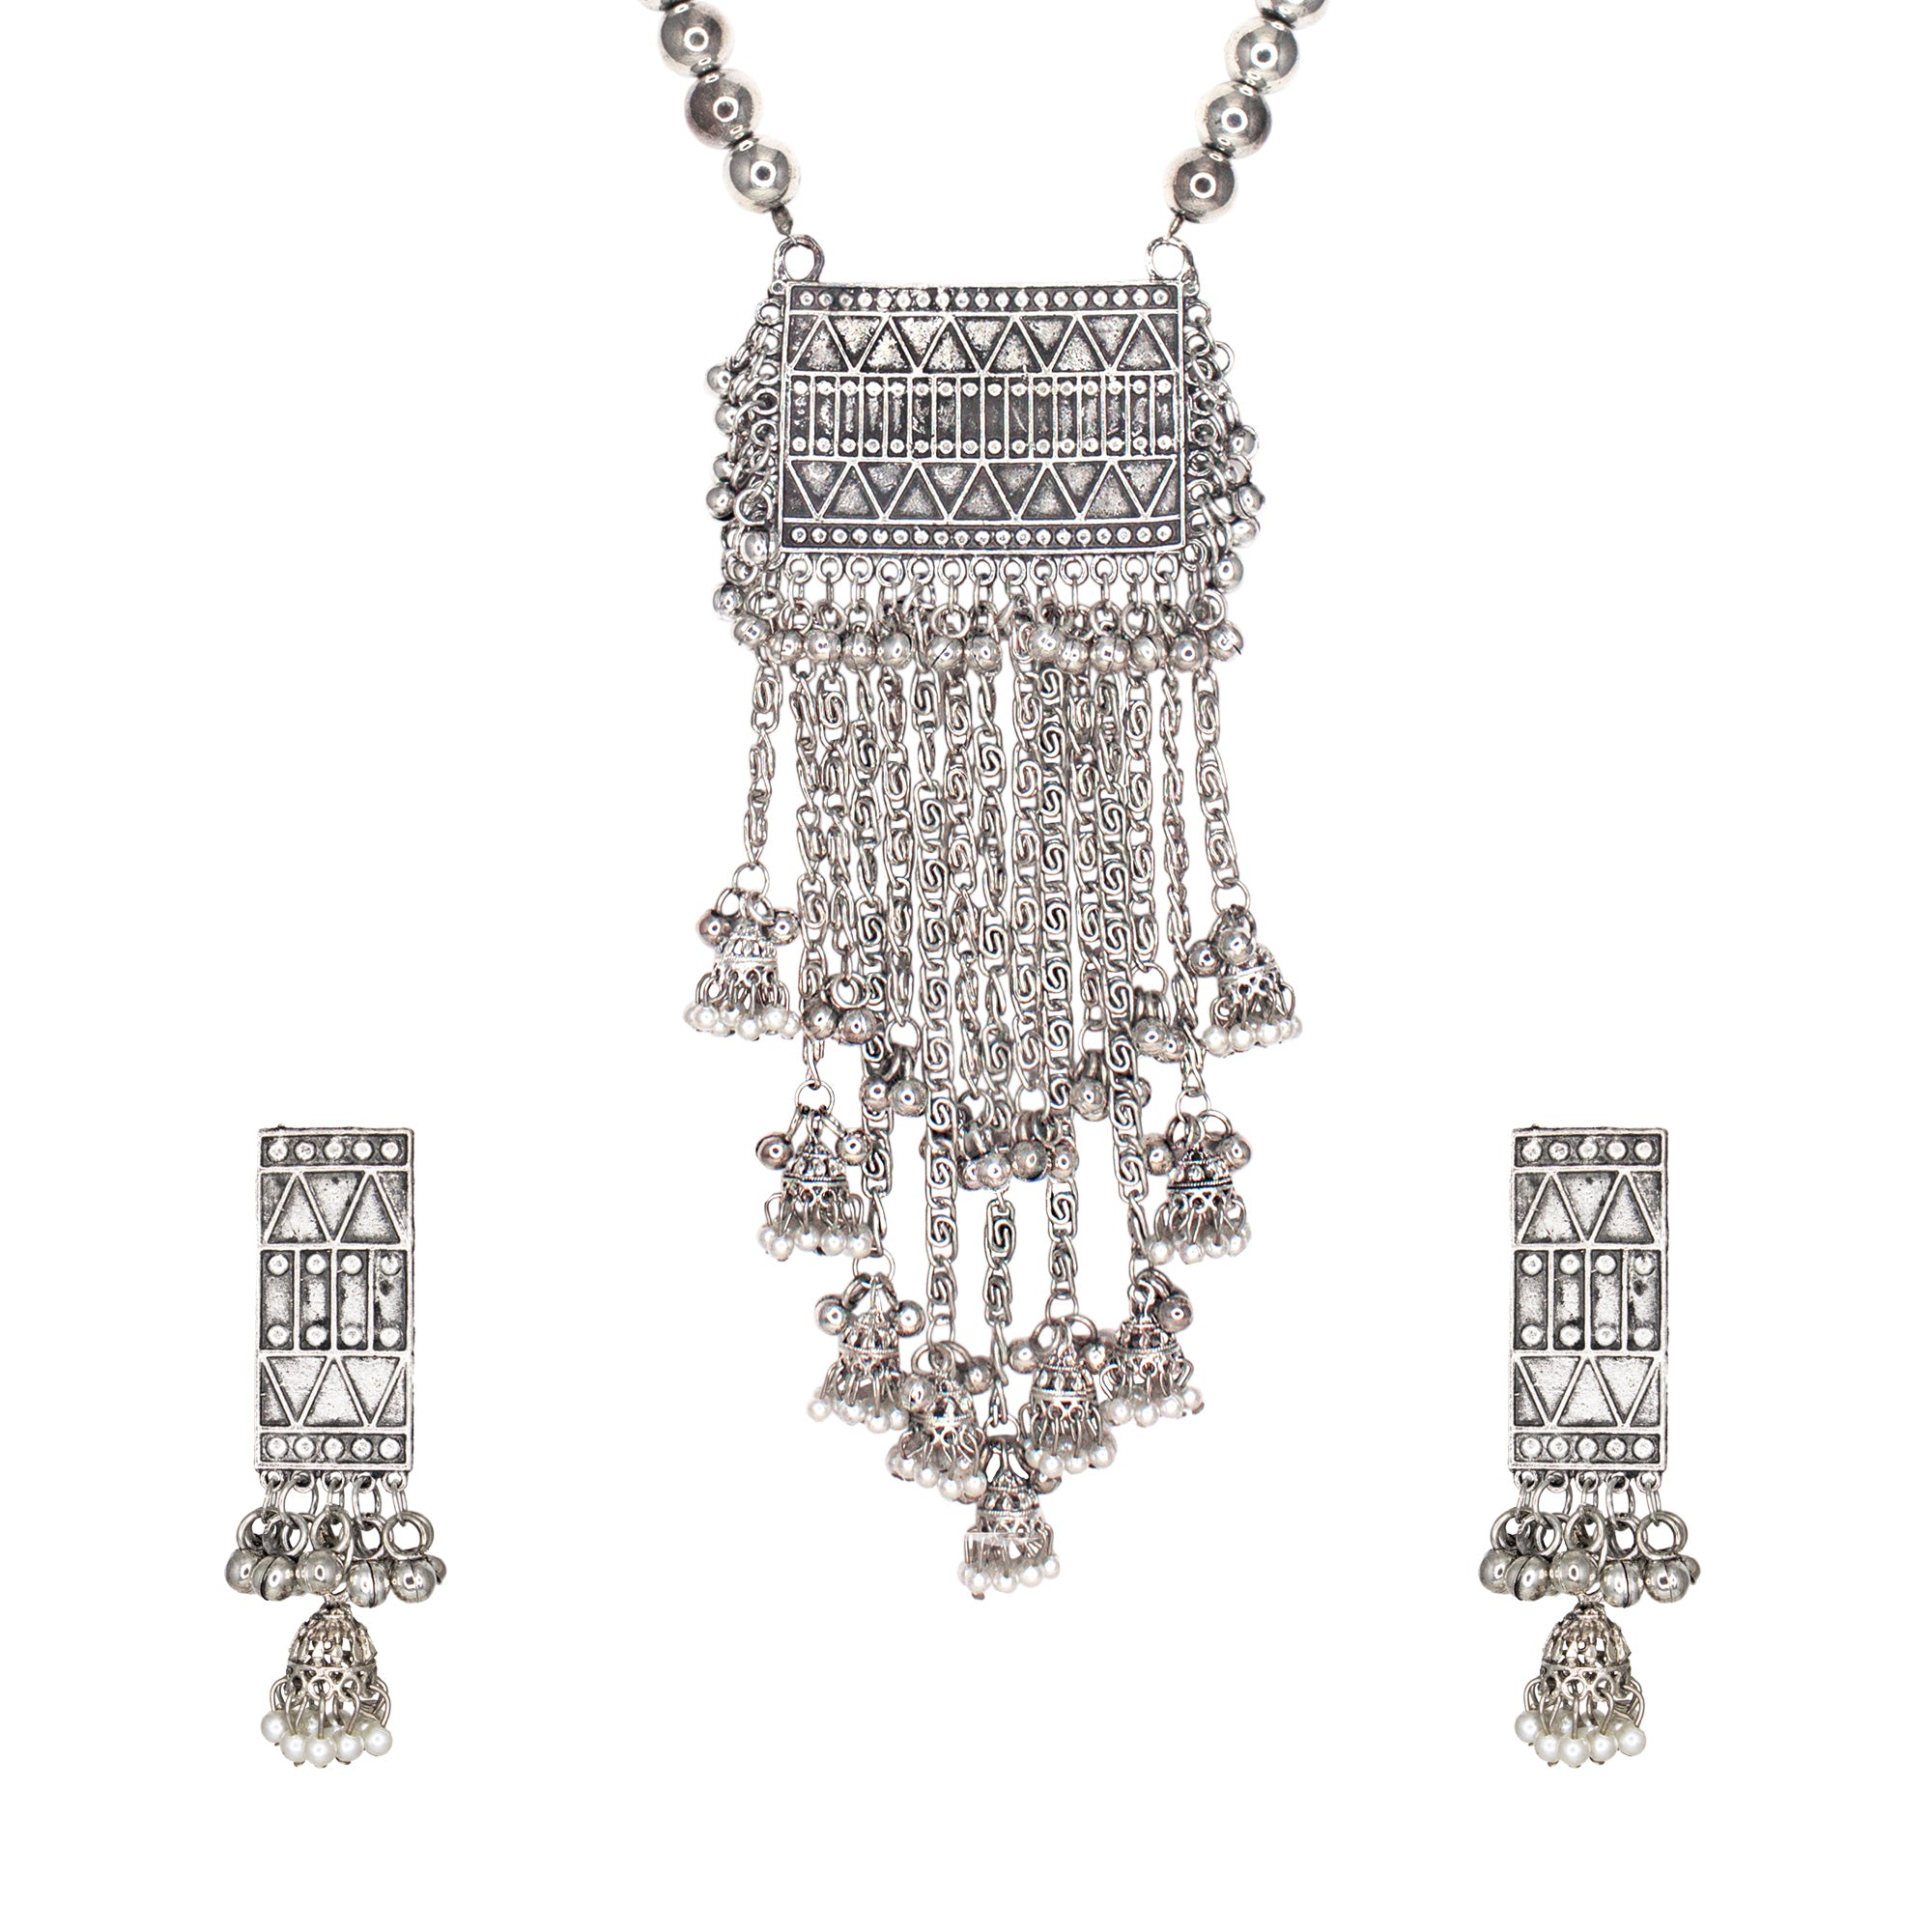 Abhinn Silver Oxidised Temple Design With Hanging Silver Beads Pendant Set For Women